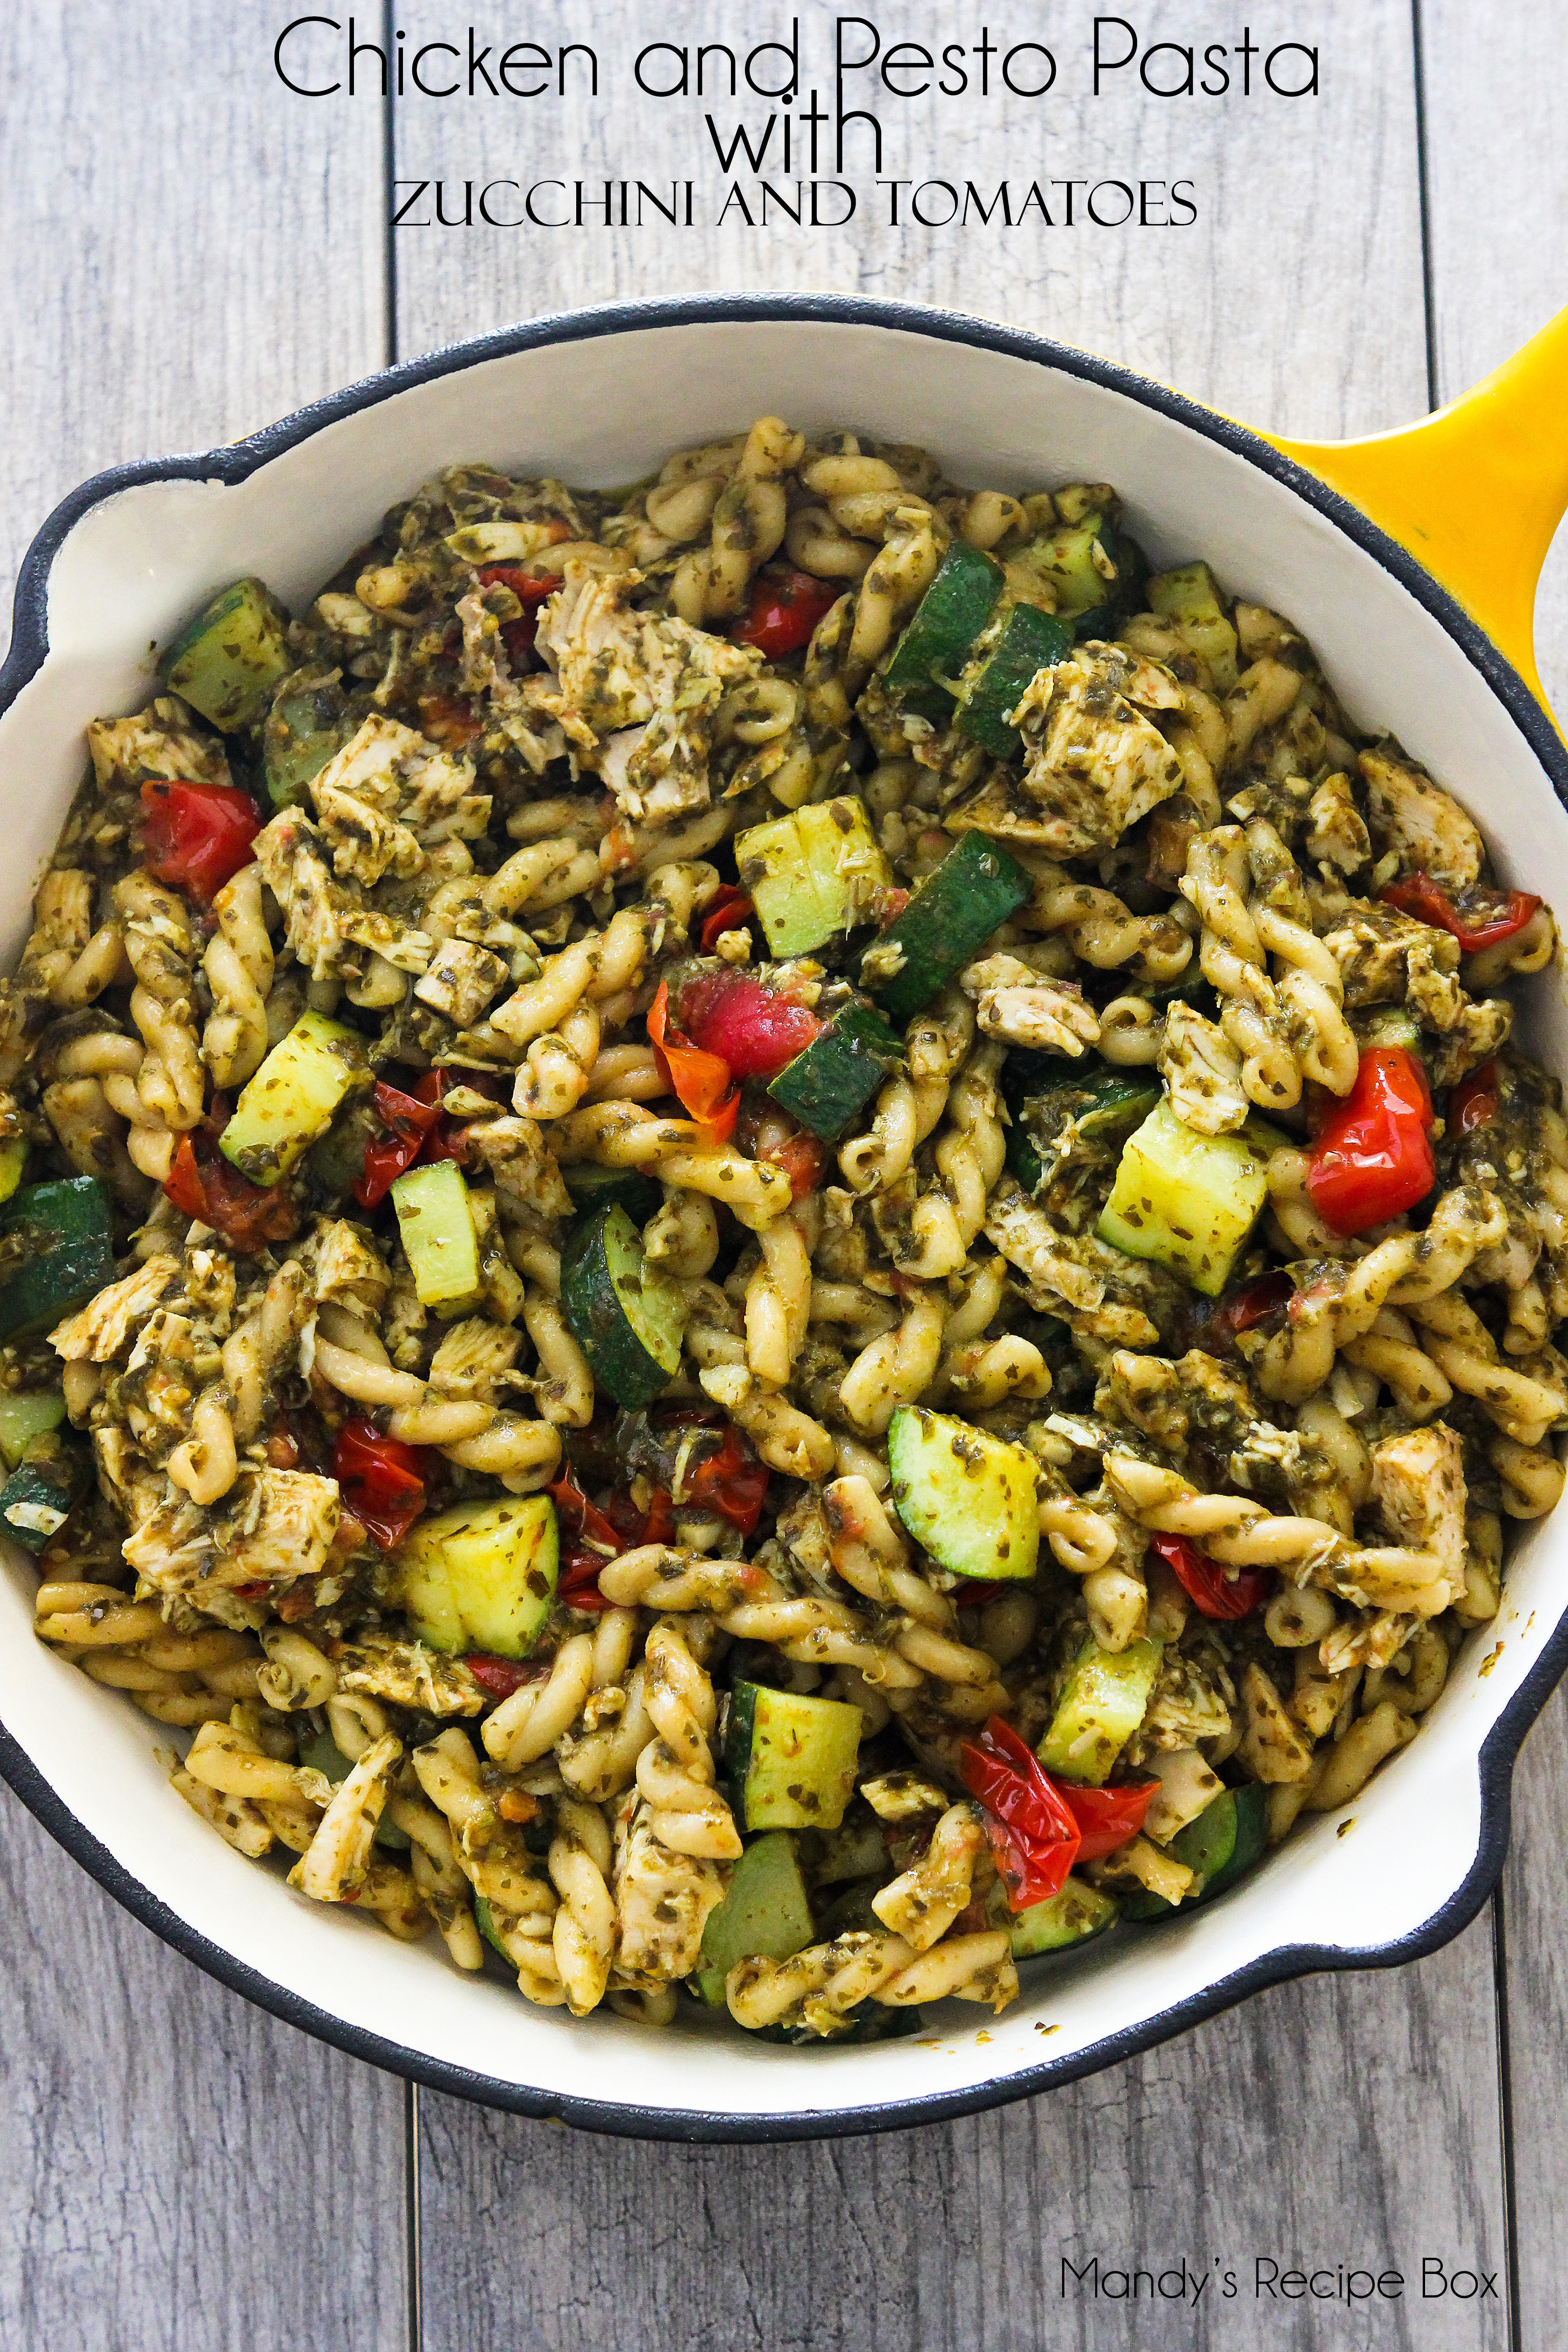 Chicken And Pesto Pasta With Zucchini And Tomatoes Mandy S Recipe Box,Pellet Grill Island